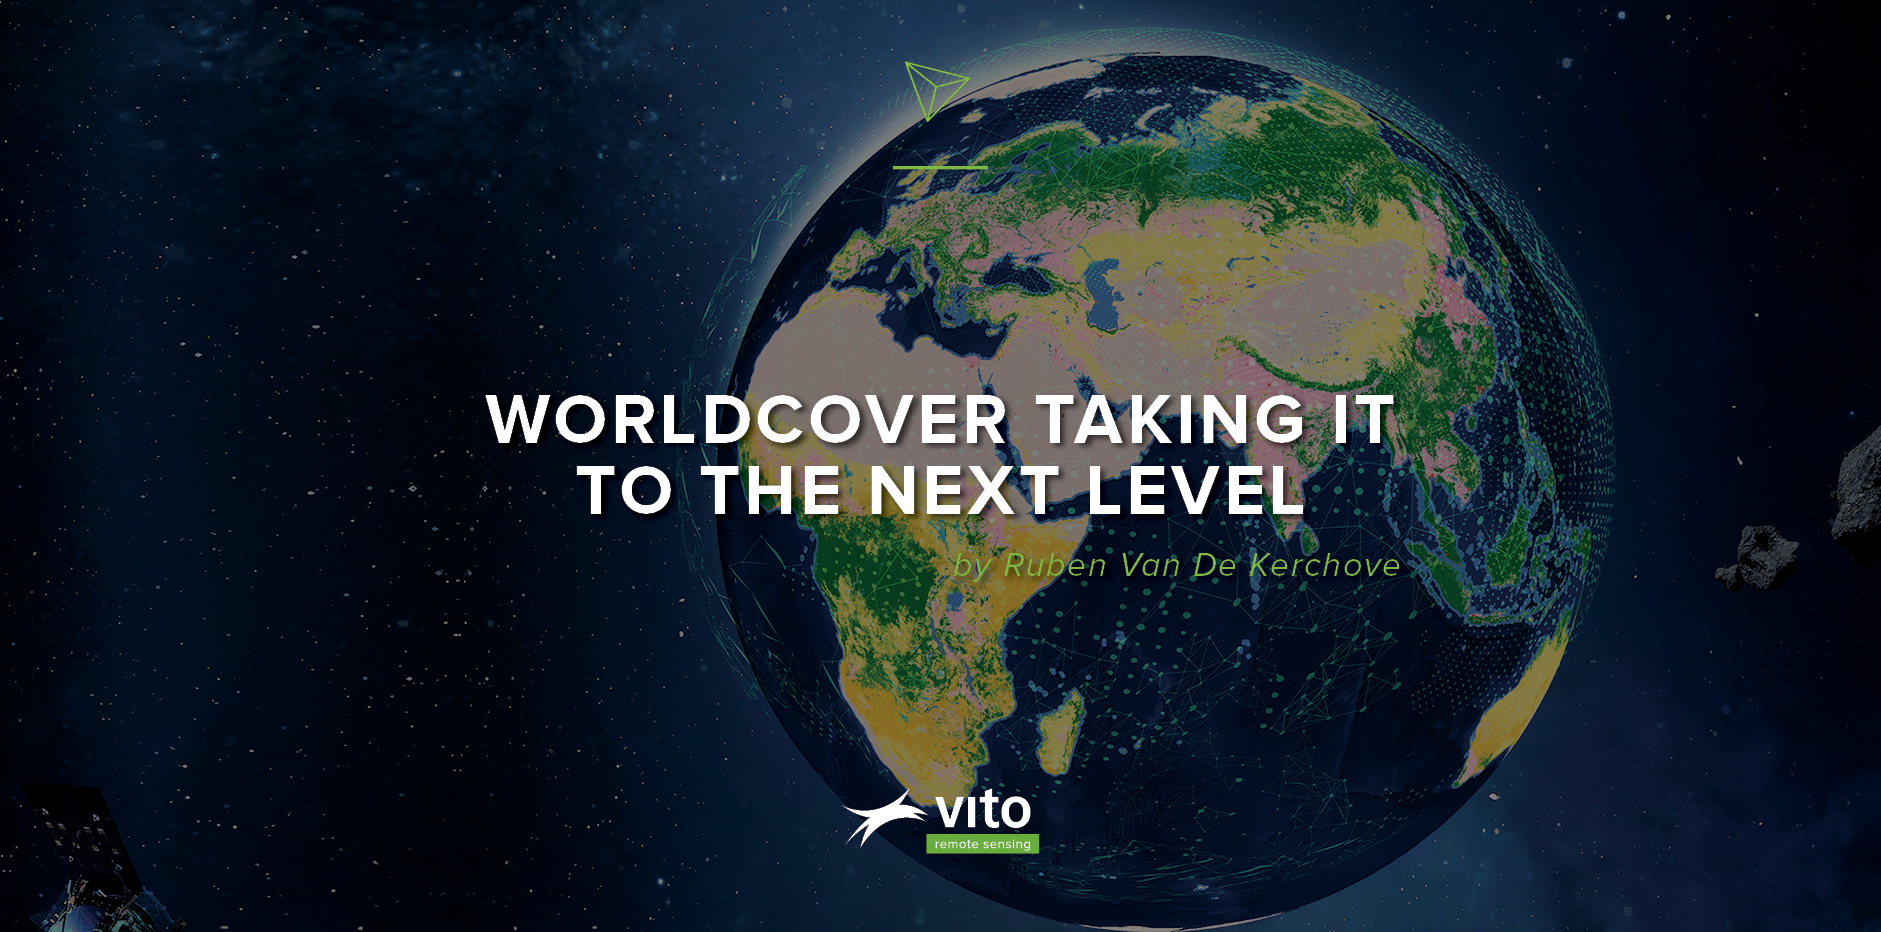 VITO: WORLDCOVER TAKING IT TO THE NEXT LEVEL